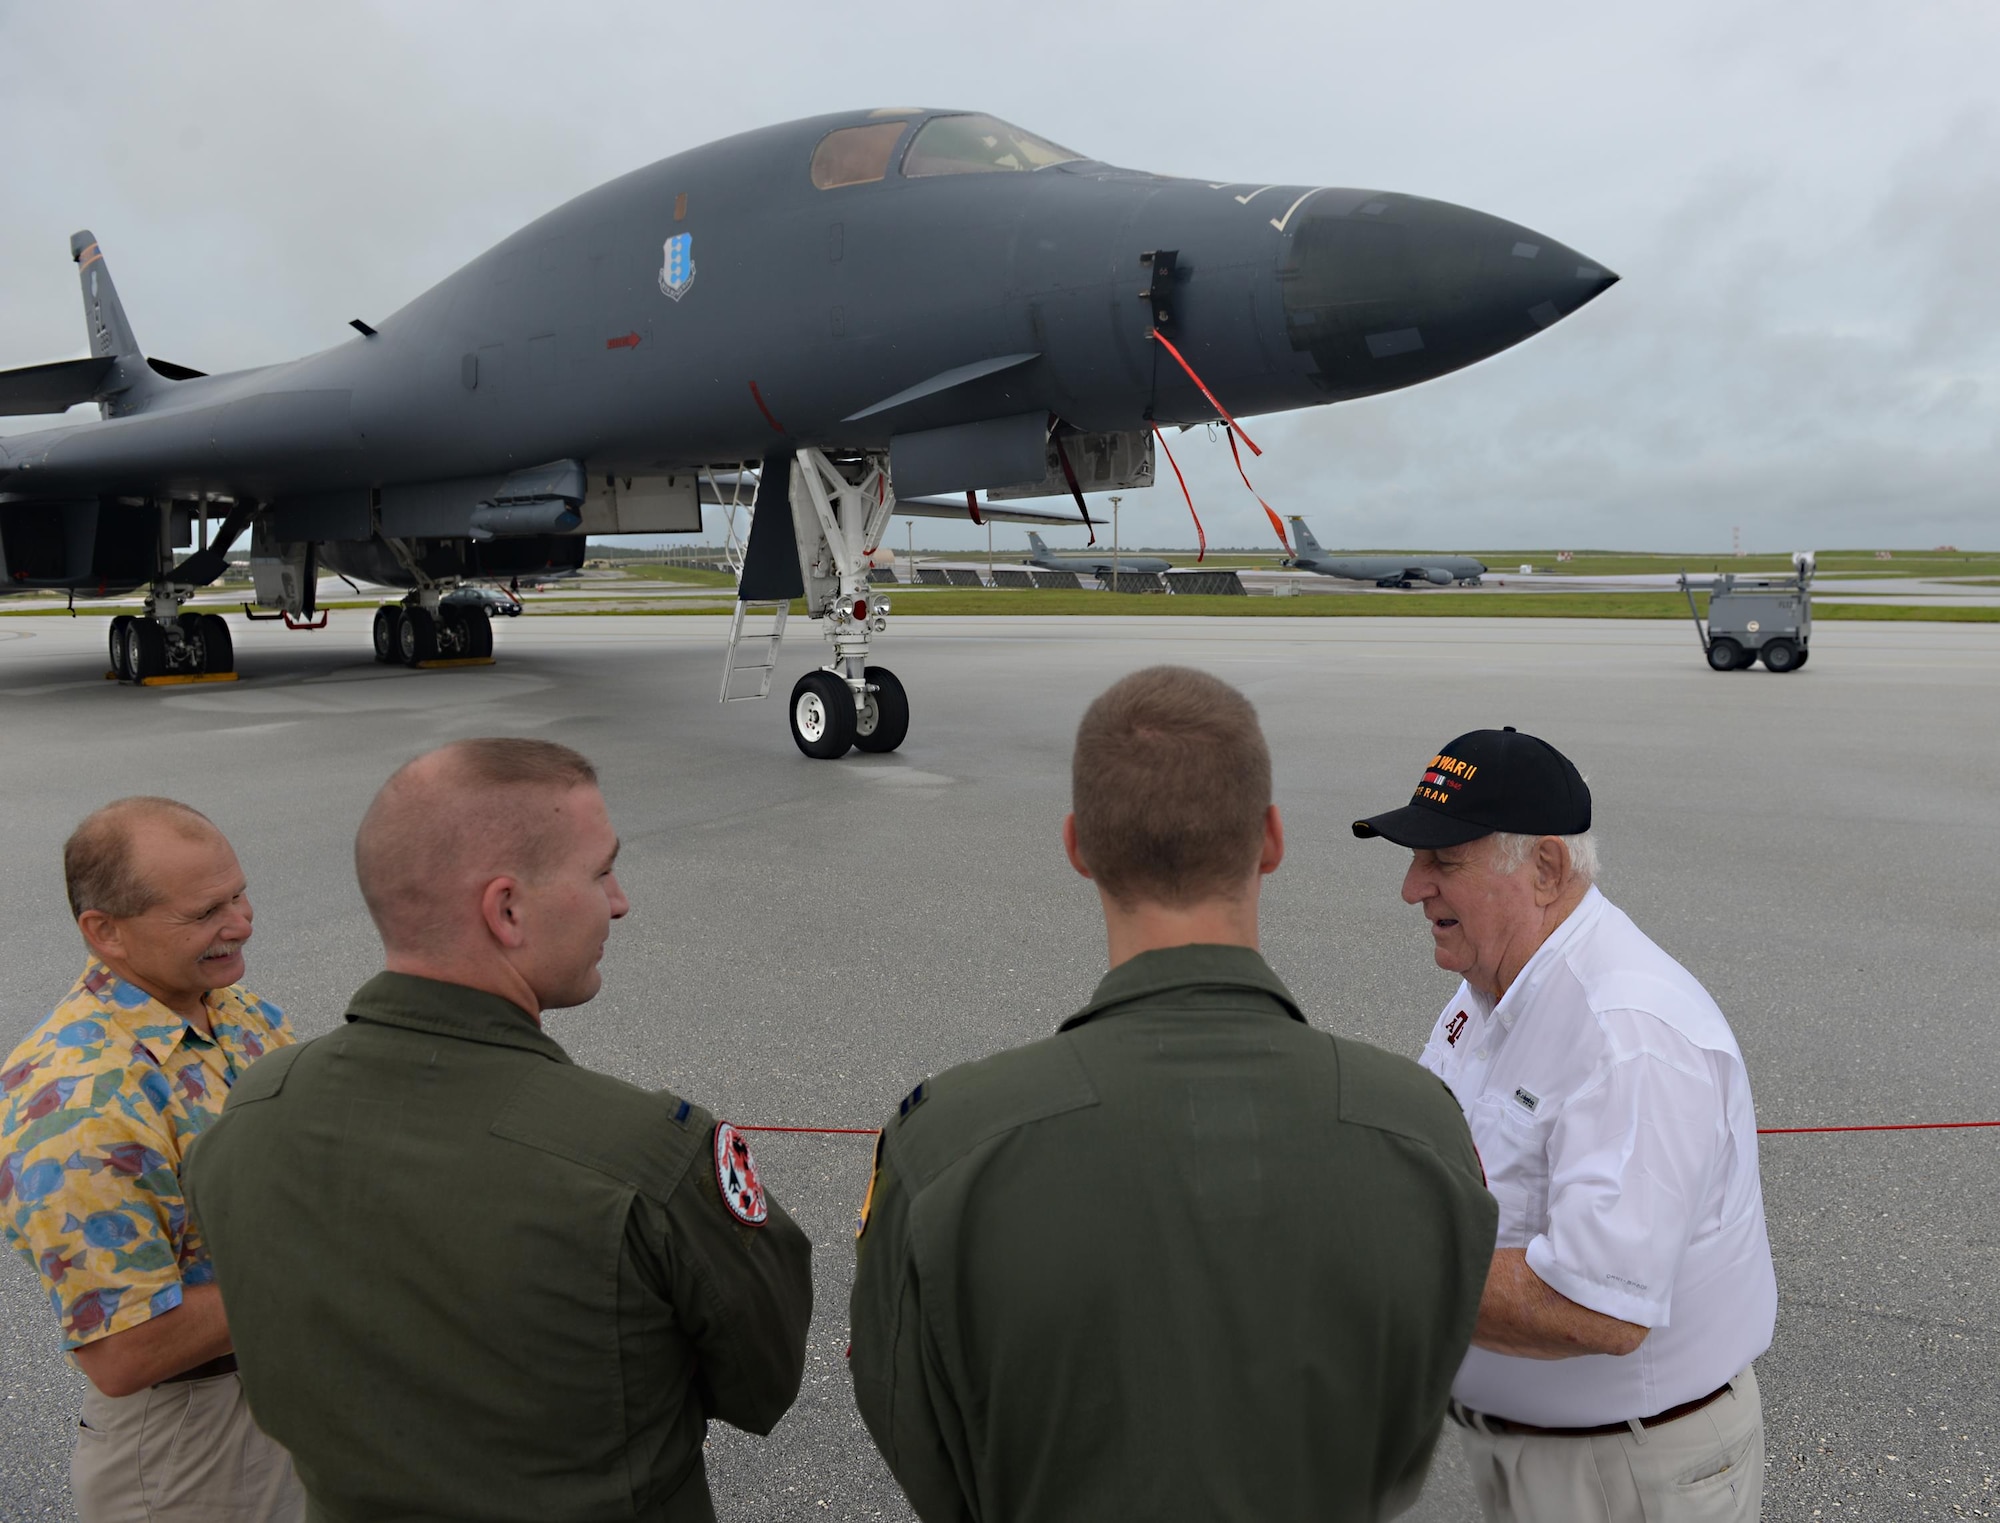 Rowland Ball, a World War II veteran, shares a story with Airmen during a visit to Andersen Air Force Base, Guam, Aug. 16, 2016. Ball was a B-29 Superfortress navigator who flew in 27 missions out of Guam. During his visit to Andersen AFB, he received the unique opportunity to see the bombers that arrived after the B-29: the B-52 Stratofortress, B-1B Lancer and B-2 Spirit. (U.S. Air Force photo by Staff Sgt. Benjamin Gonsier)  